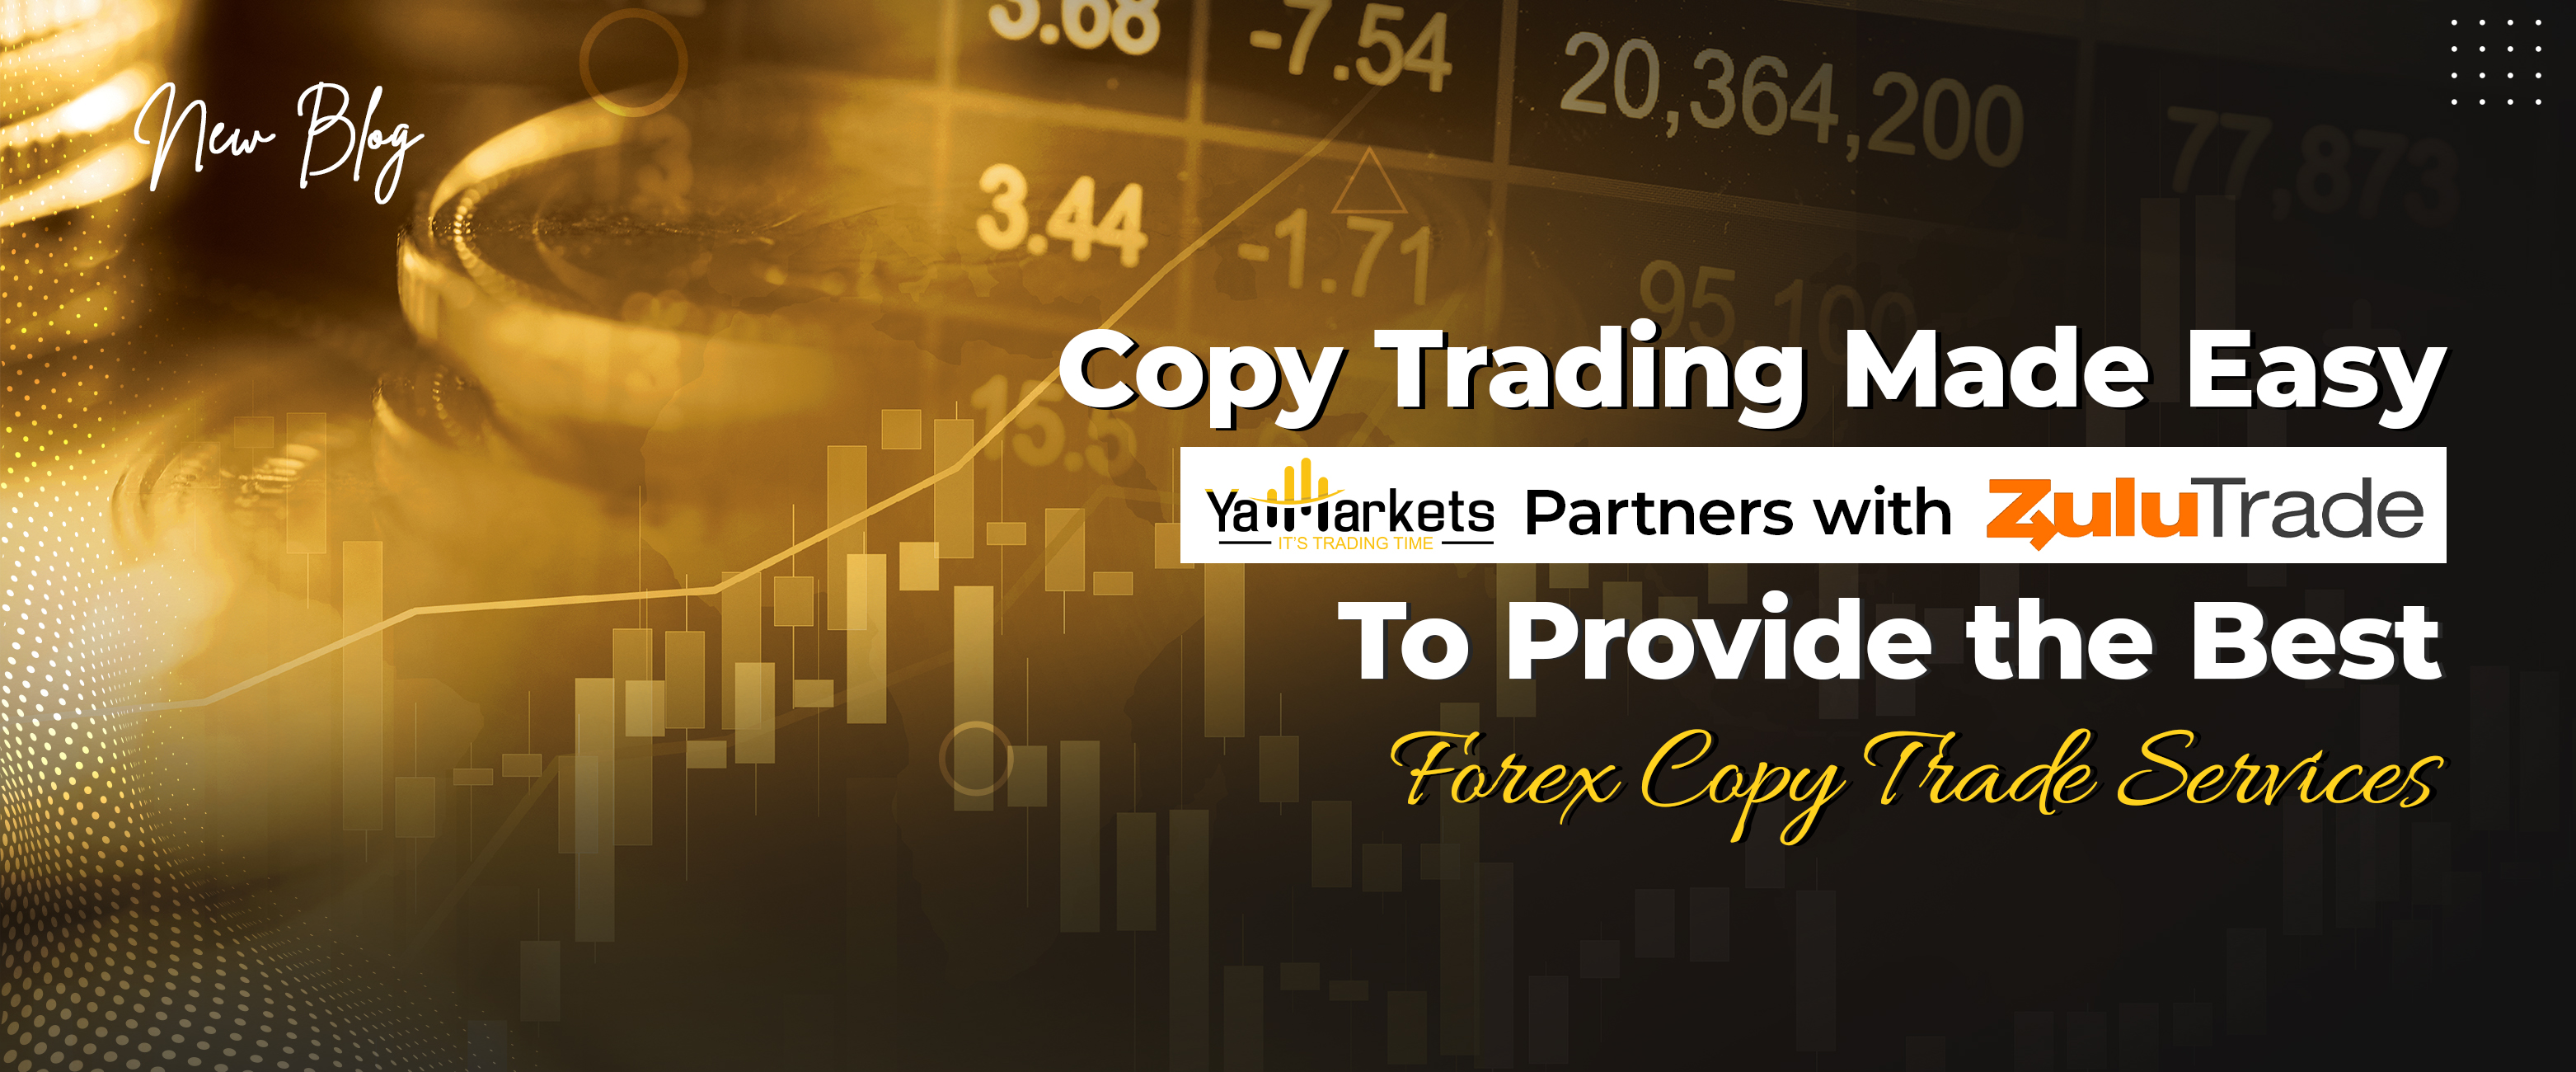 Best Forex Copy Trade Services with ZuluTrade